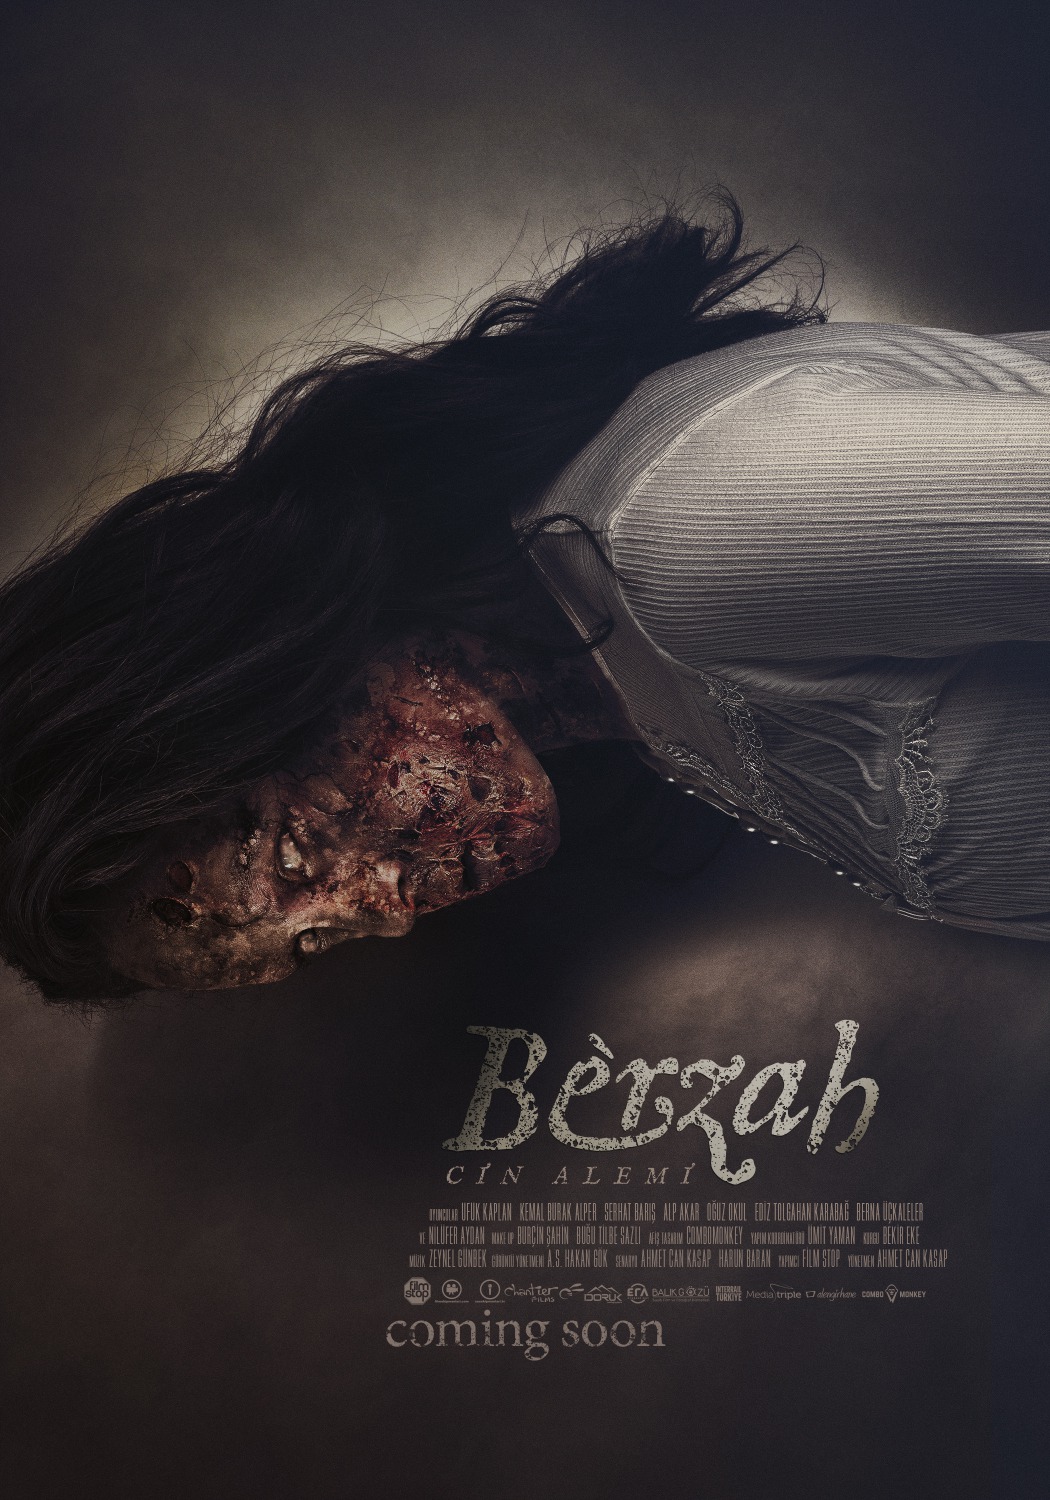 Extra Large Movie Poster Image for Berzah: Cin Alemi (#3 of 3)